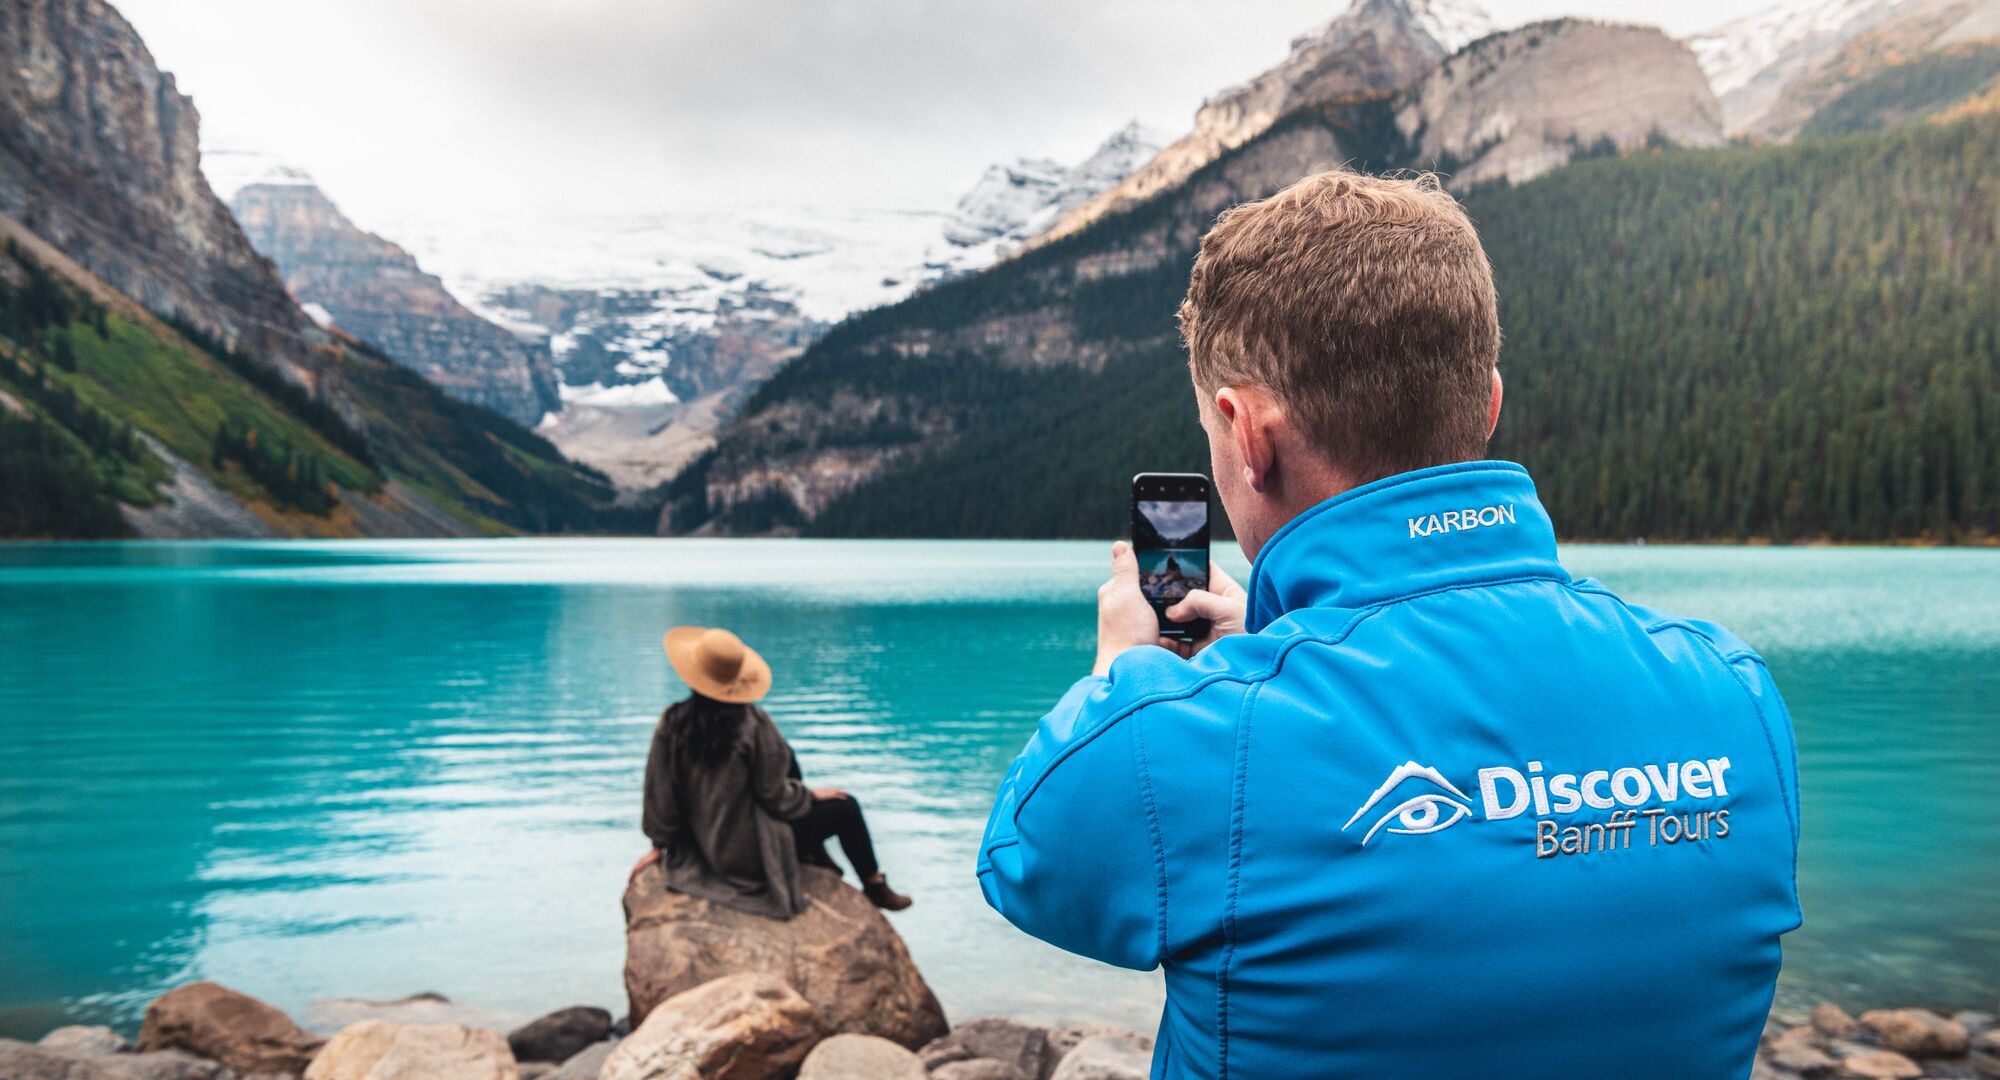 A tour guide taking a photo of a guest in front of Lake Louise on a guided tour